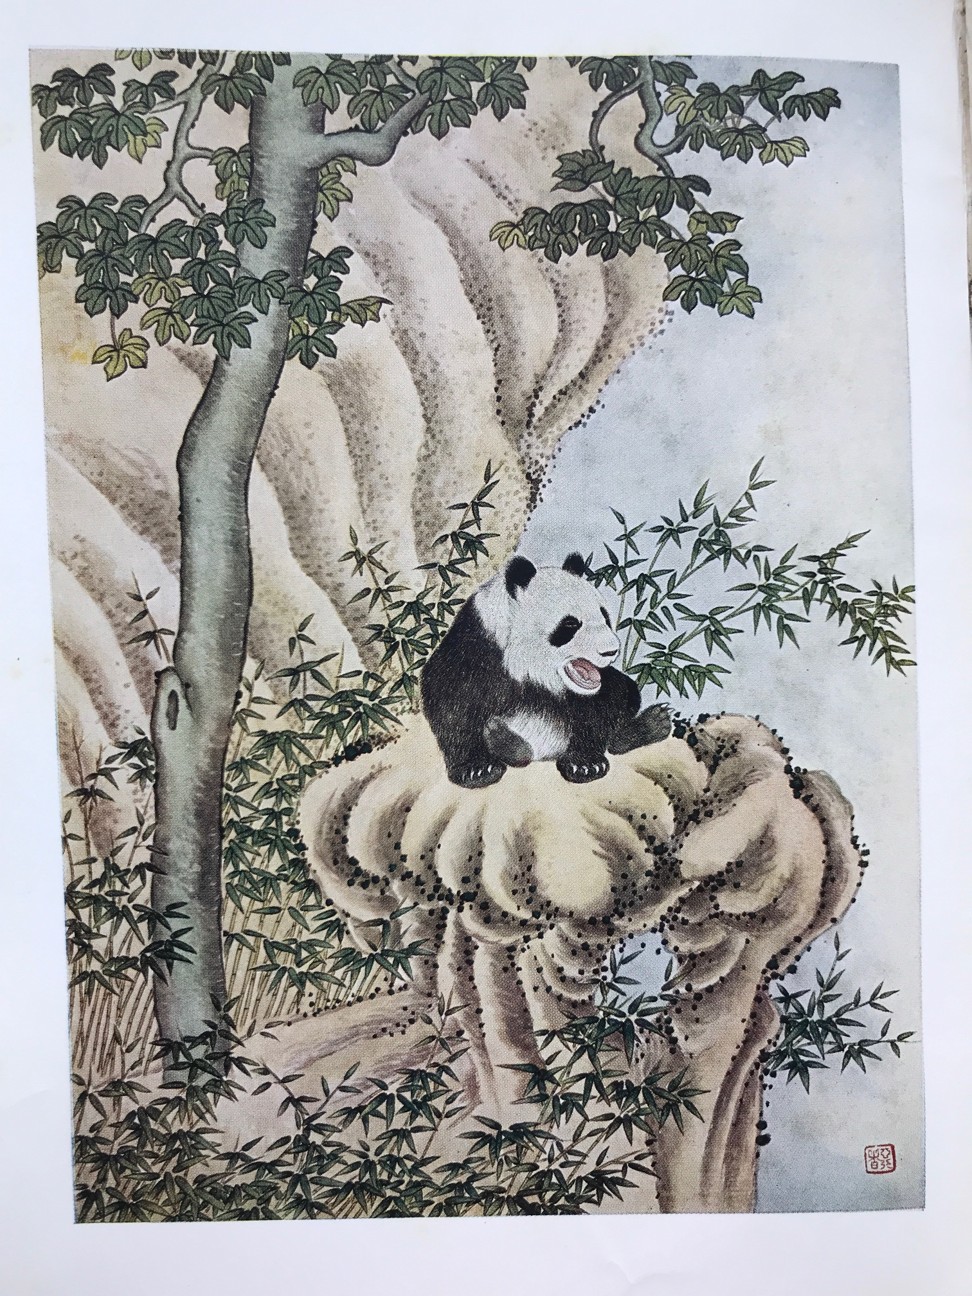 An illustration in Chiang’s Chin-pao and the Giant Pandas.